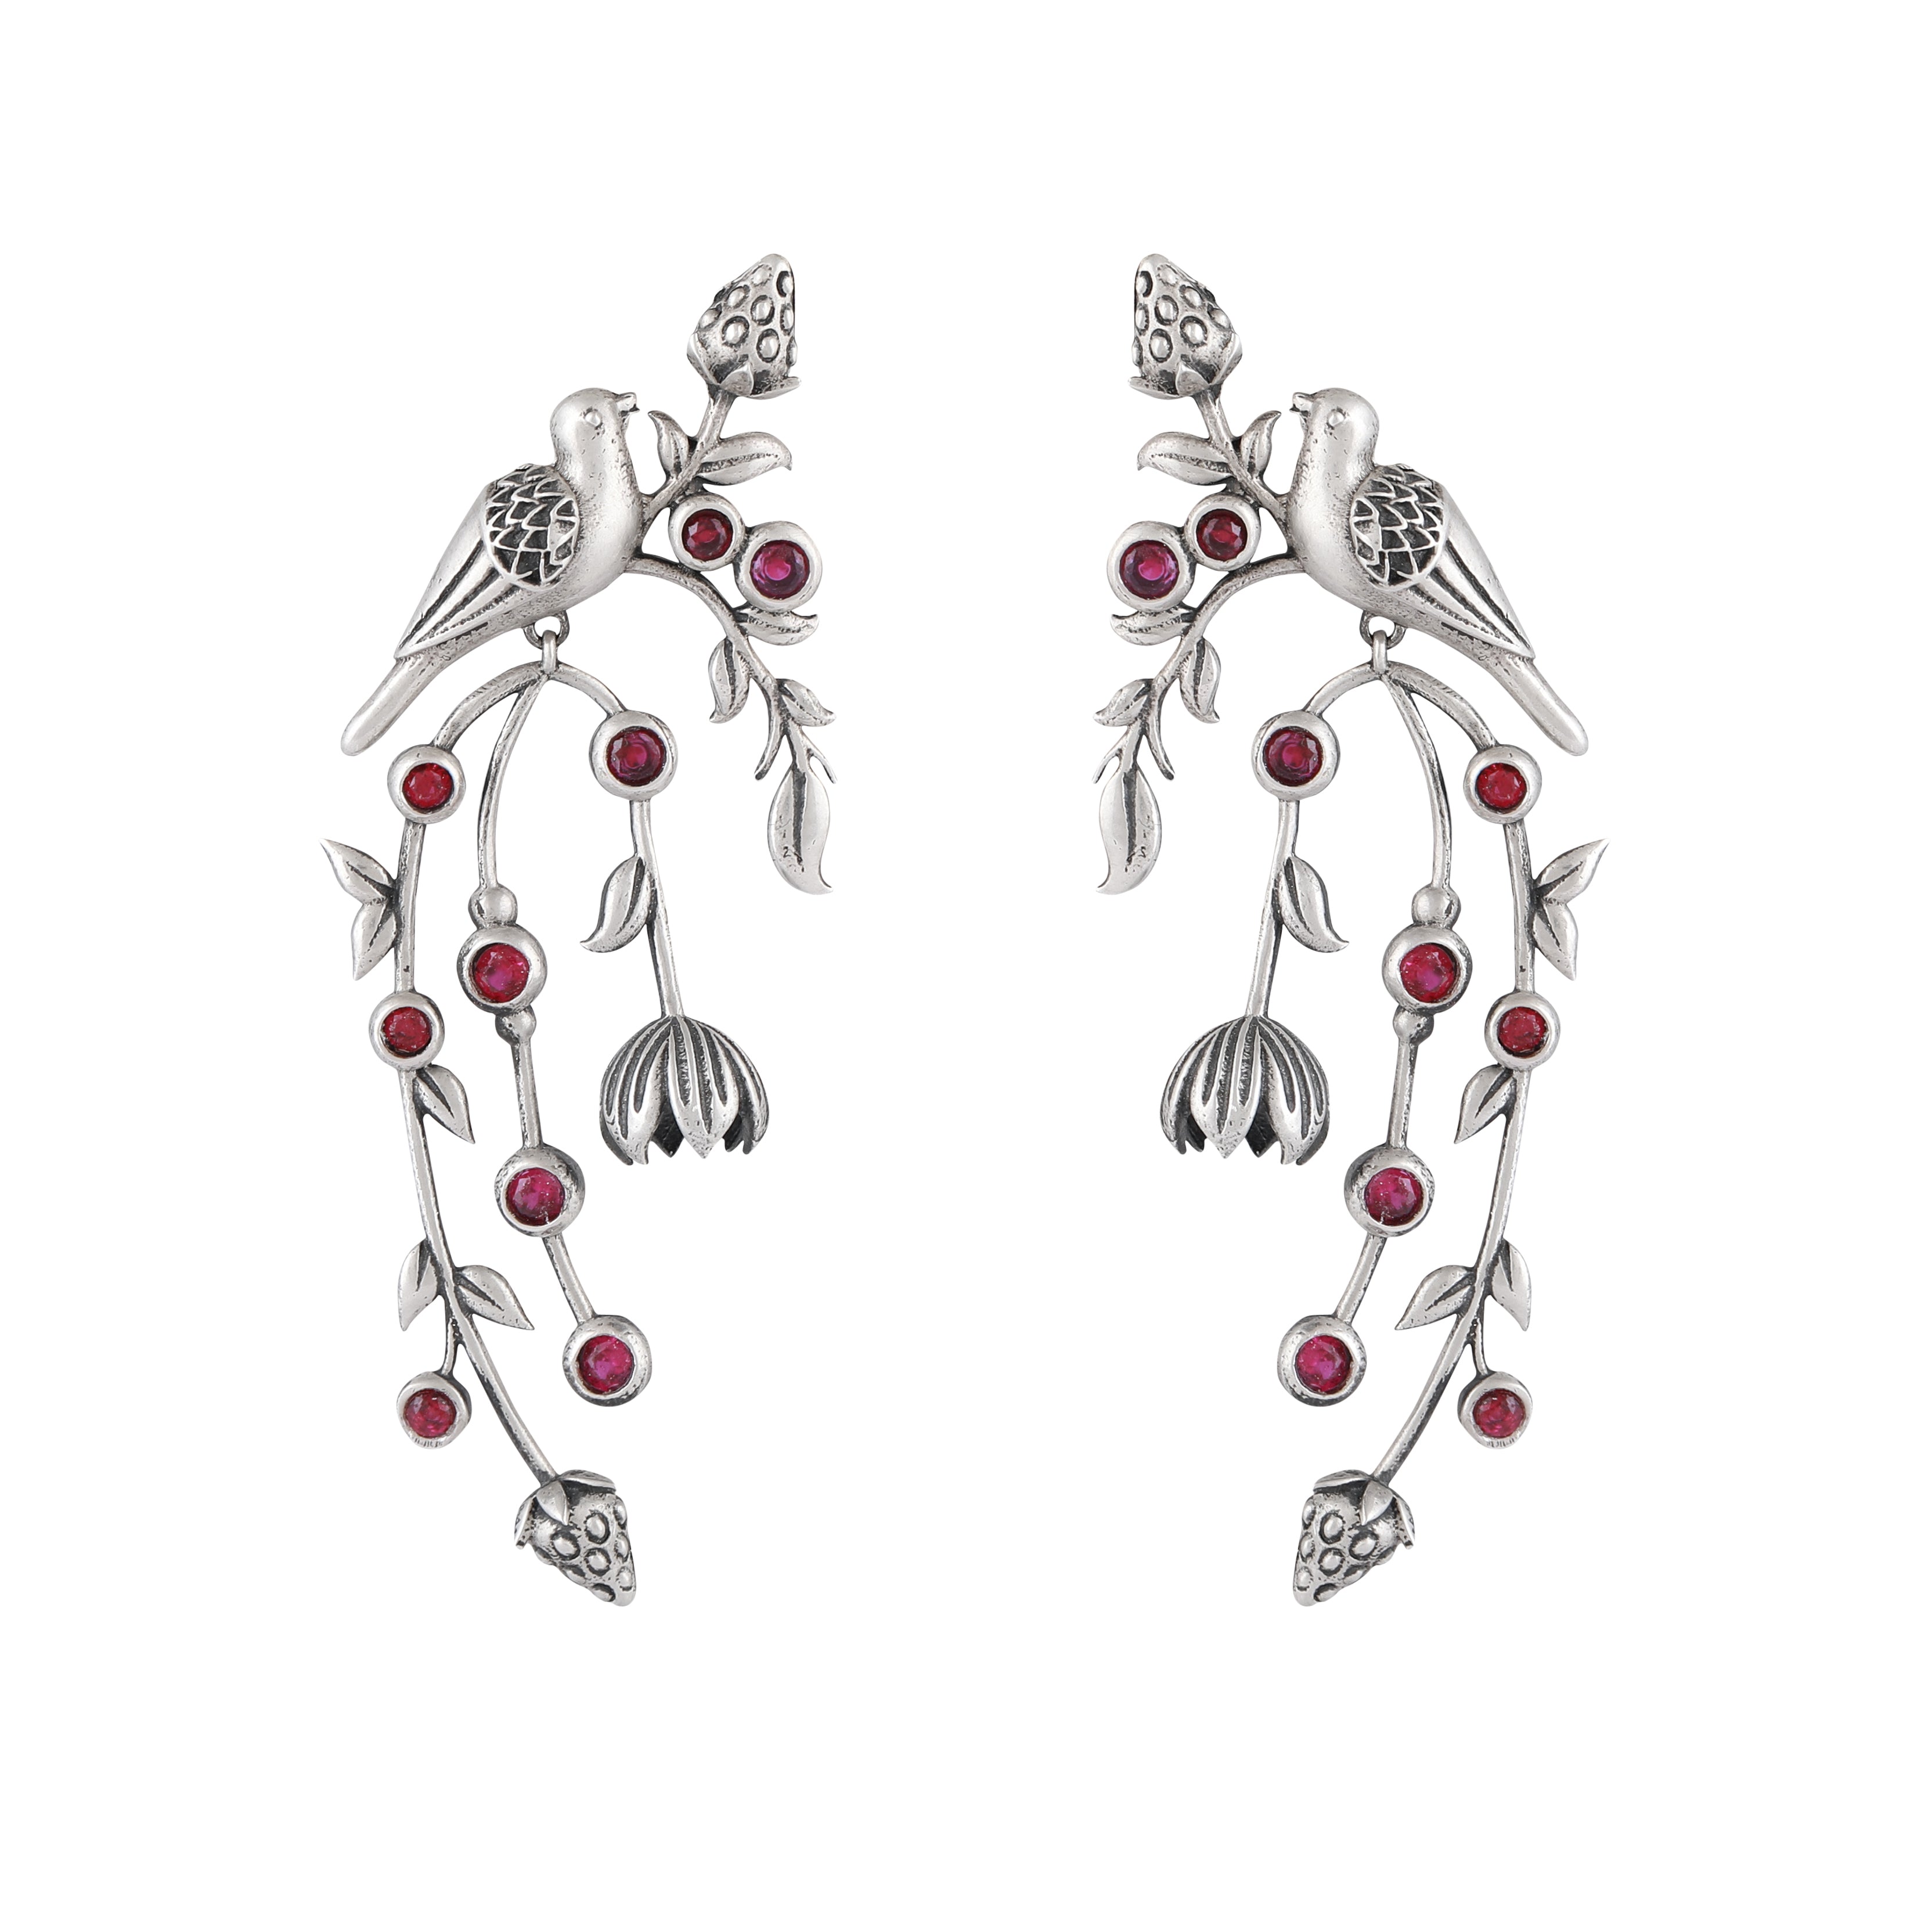 William Morris - Strawberry Thief Dangling Pods Silver Earrings by Moha